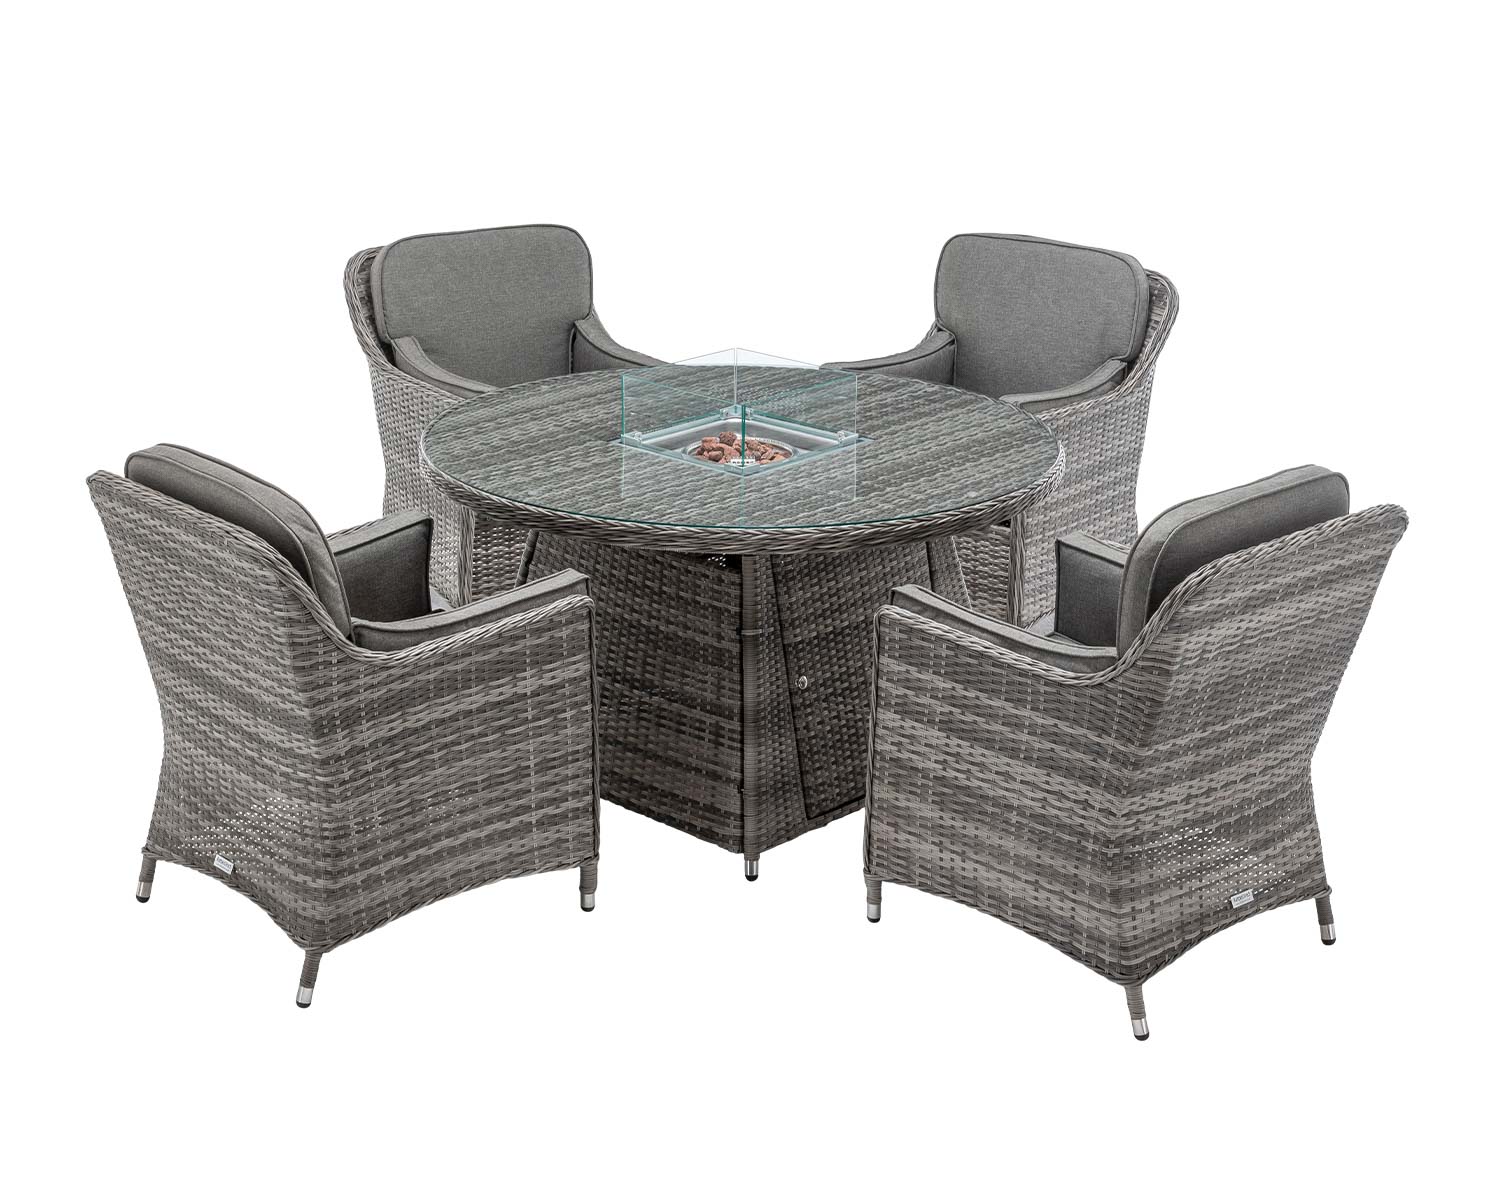 4 Seat Rattan Garden Dining Set With Round Table In Grey With Fire Pit Lyon Rattan Direct